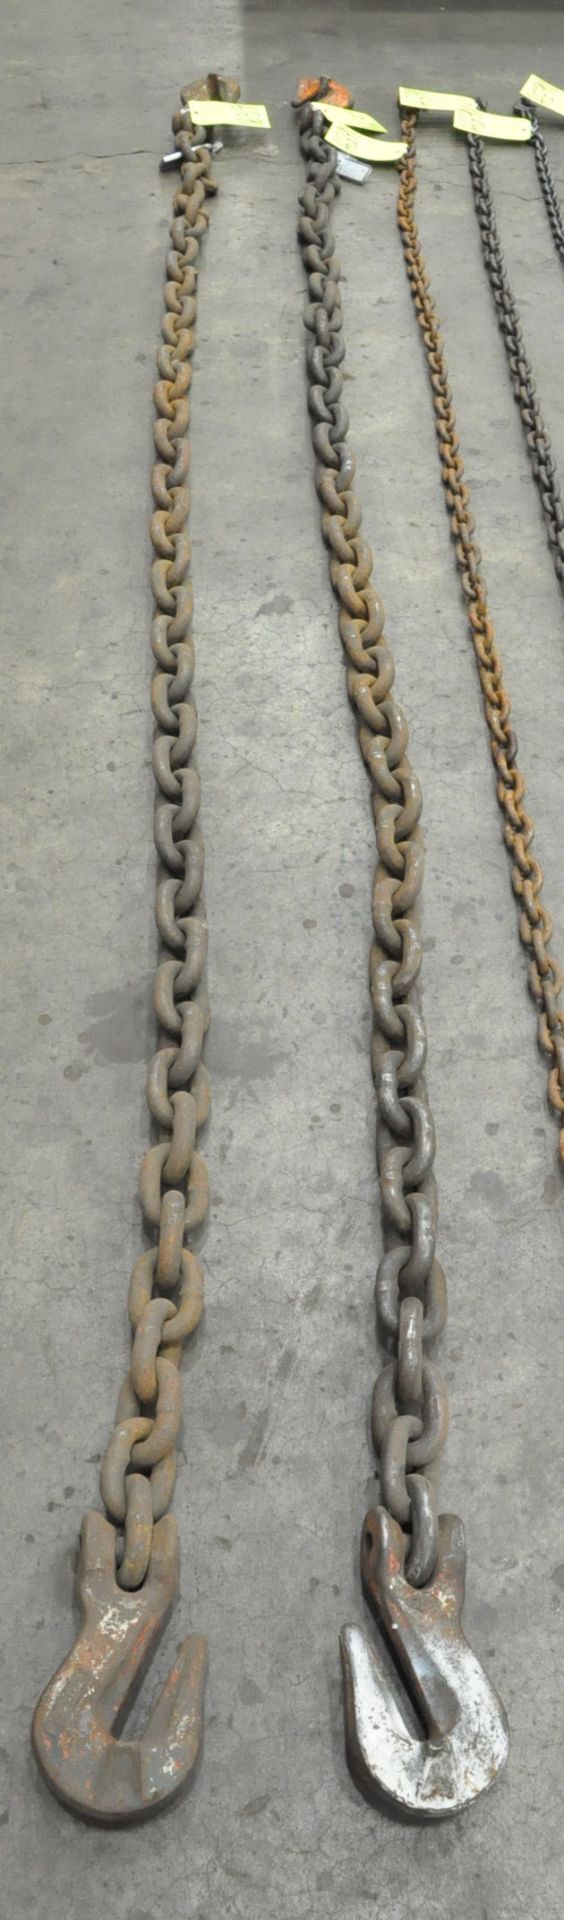 Lot-(2) 3/4" Link x 10' Long 2-Hook Chain, Cert Tag, (G-24), (Yellow Tag) - Image 2 of 2